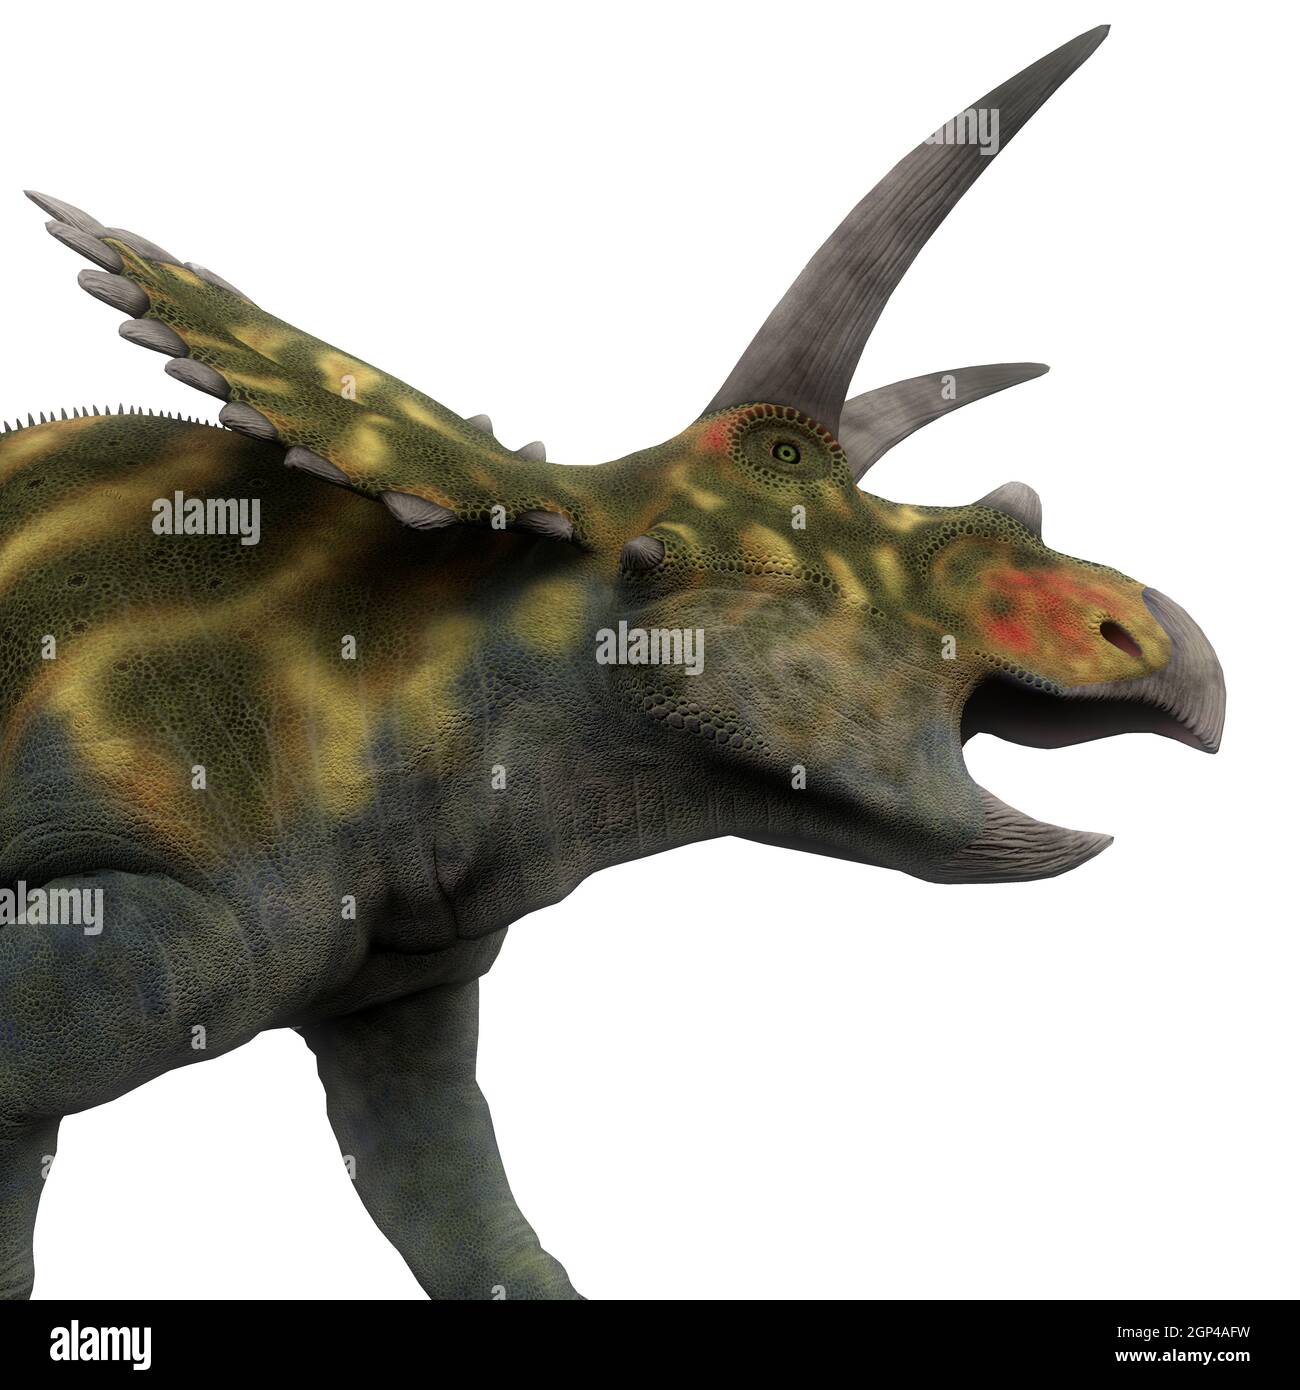 Coahuilaceratops was a ceratopsian herbivorous dinosaur that lived in the Cretaceous Period of Mexico. Stock Photo